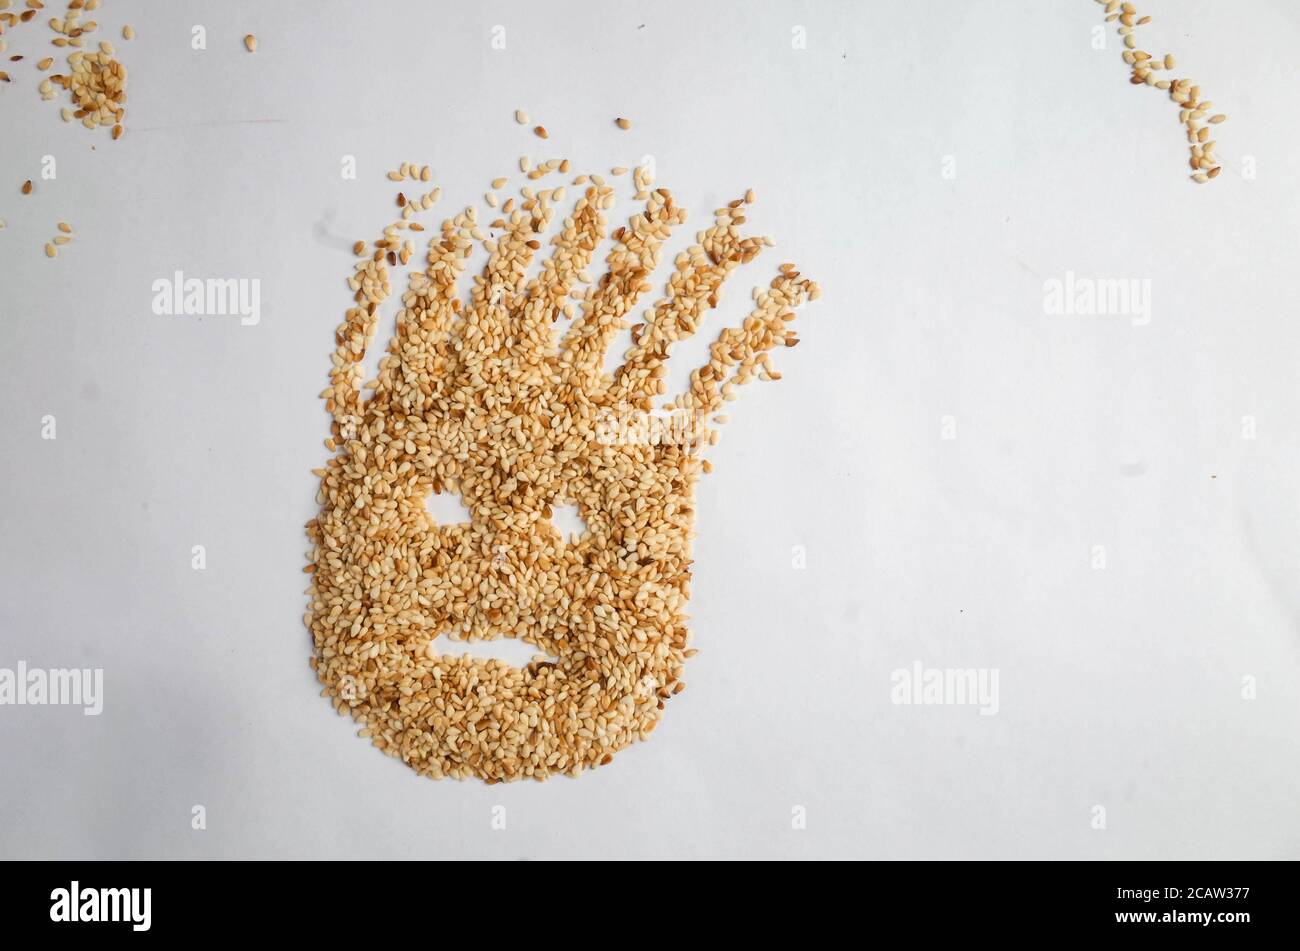 photo of face mader from sesame Stock Photo